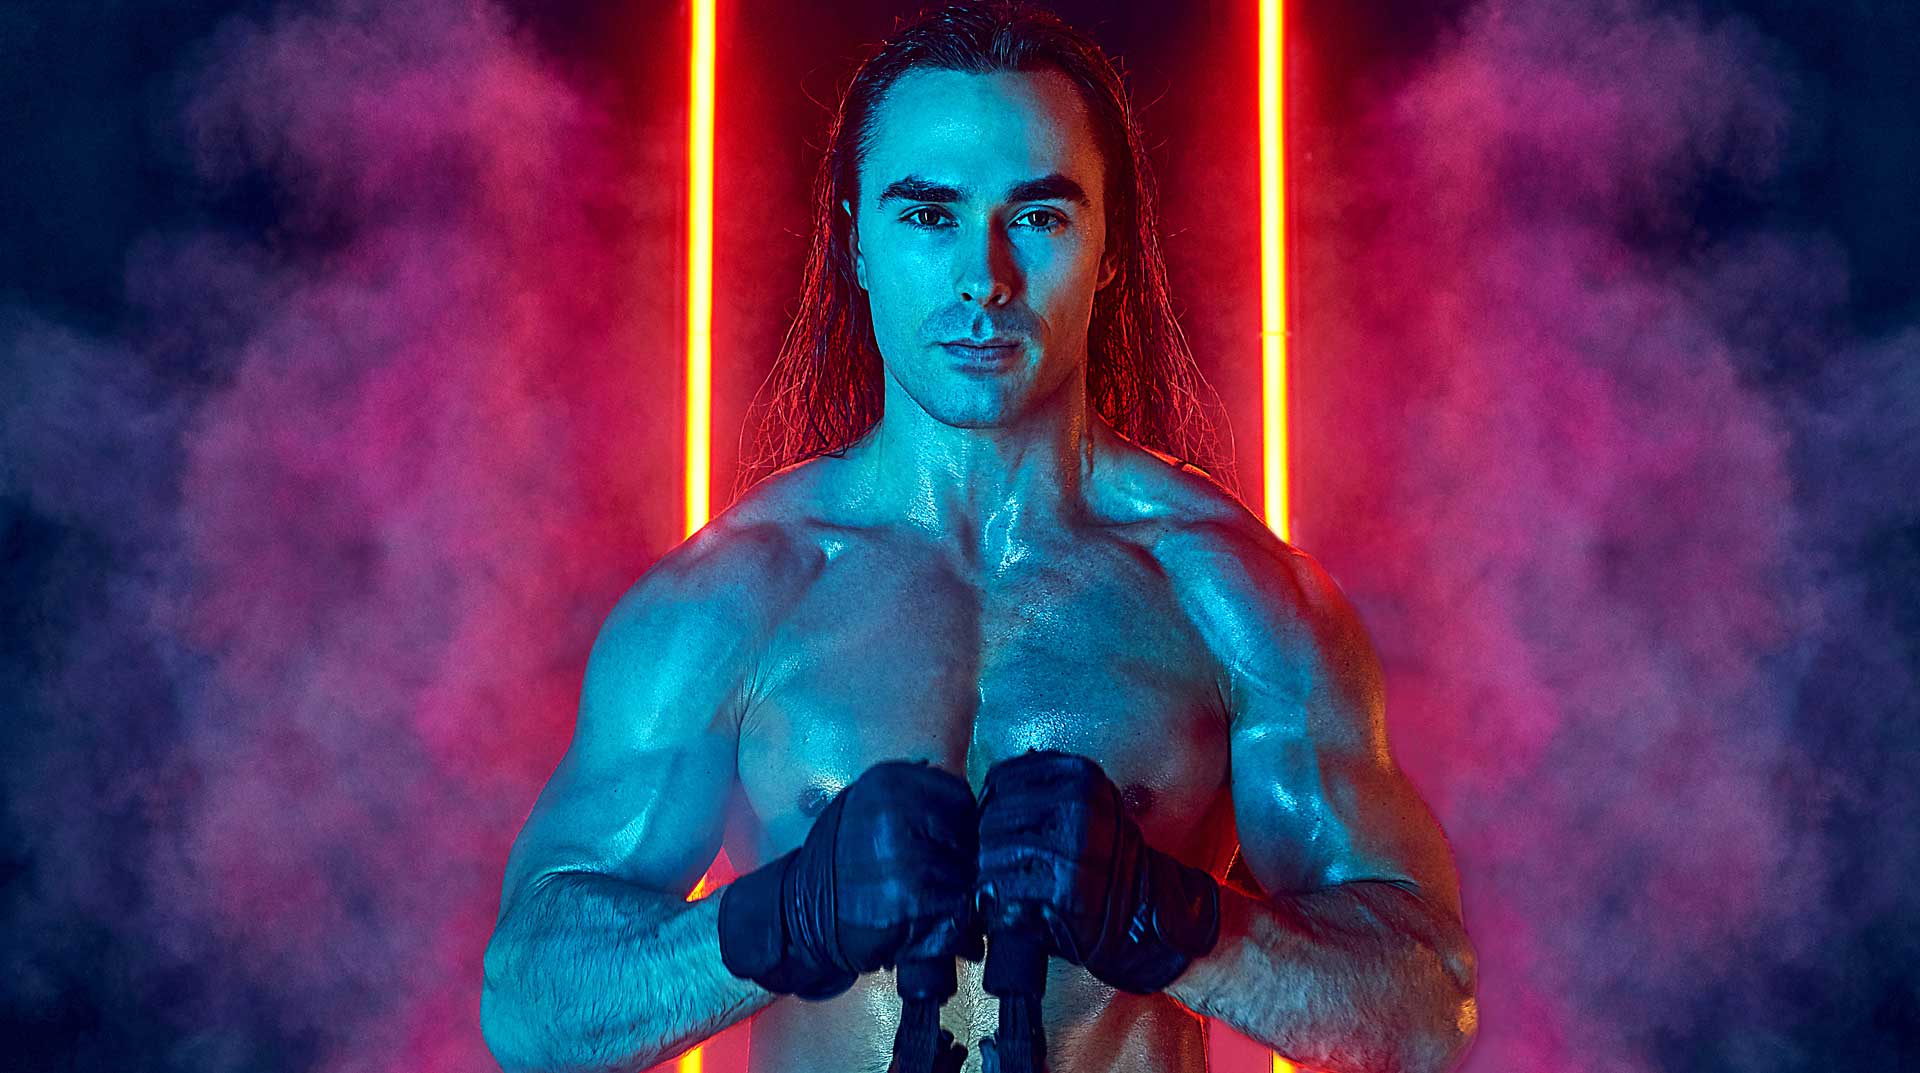 Weightlifting portrait with blue and red light